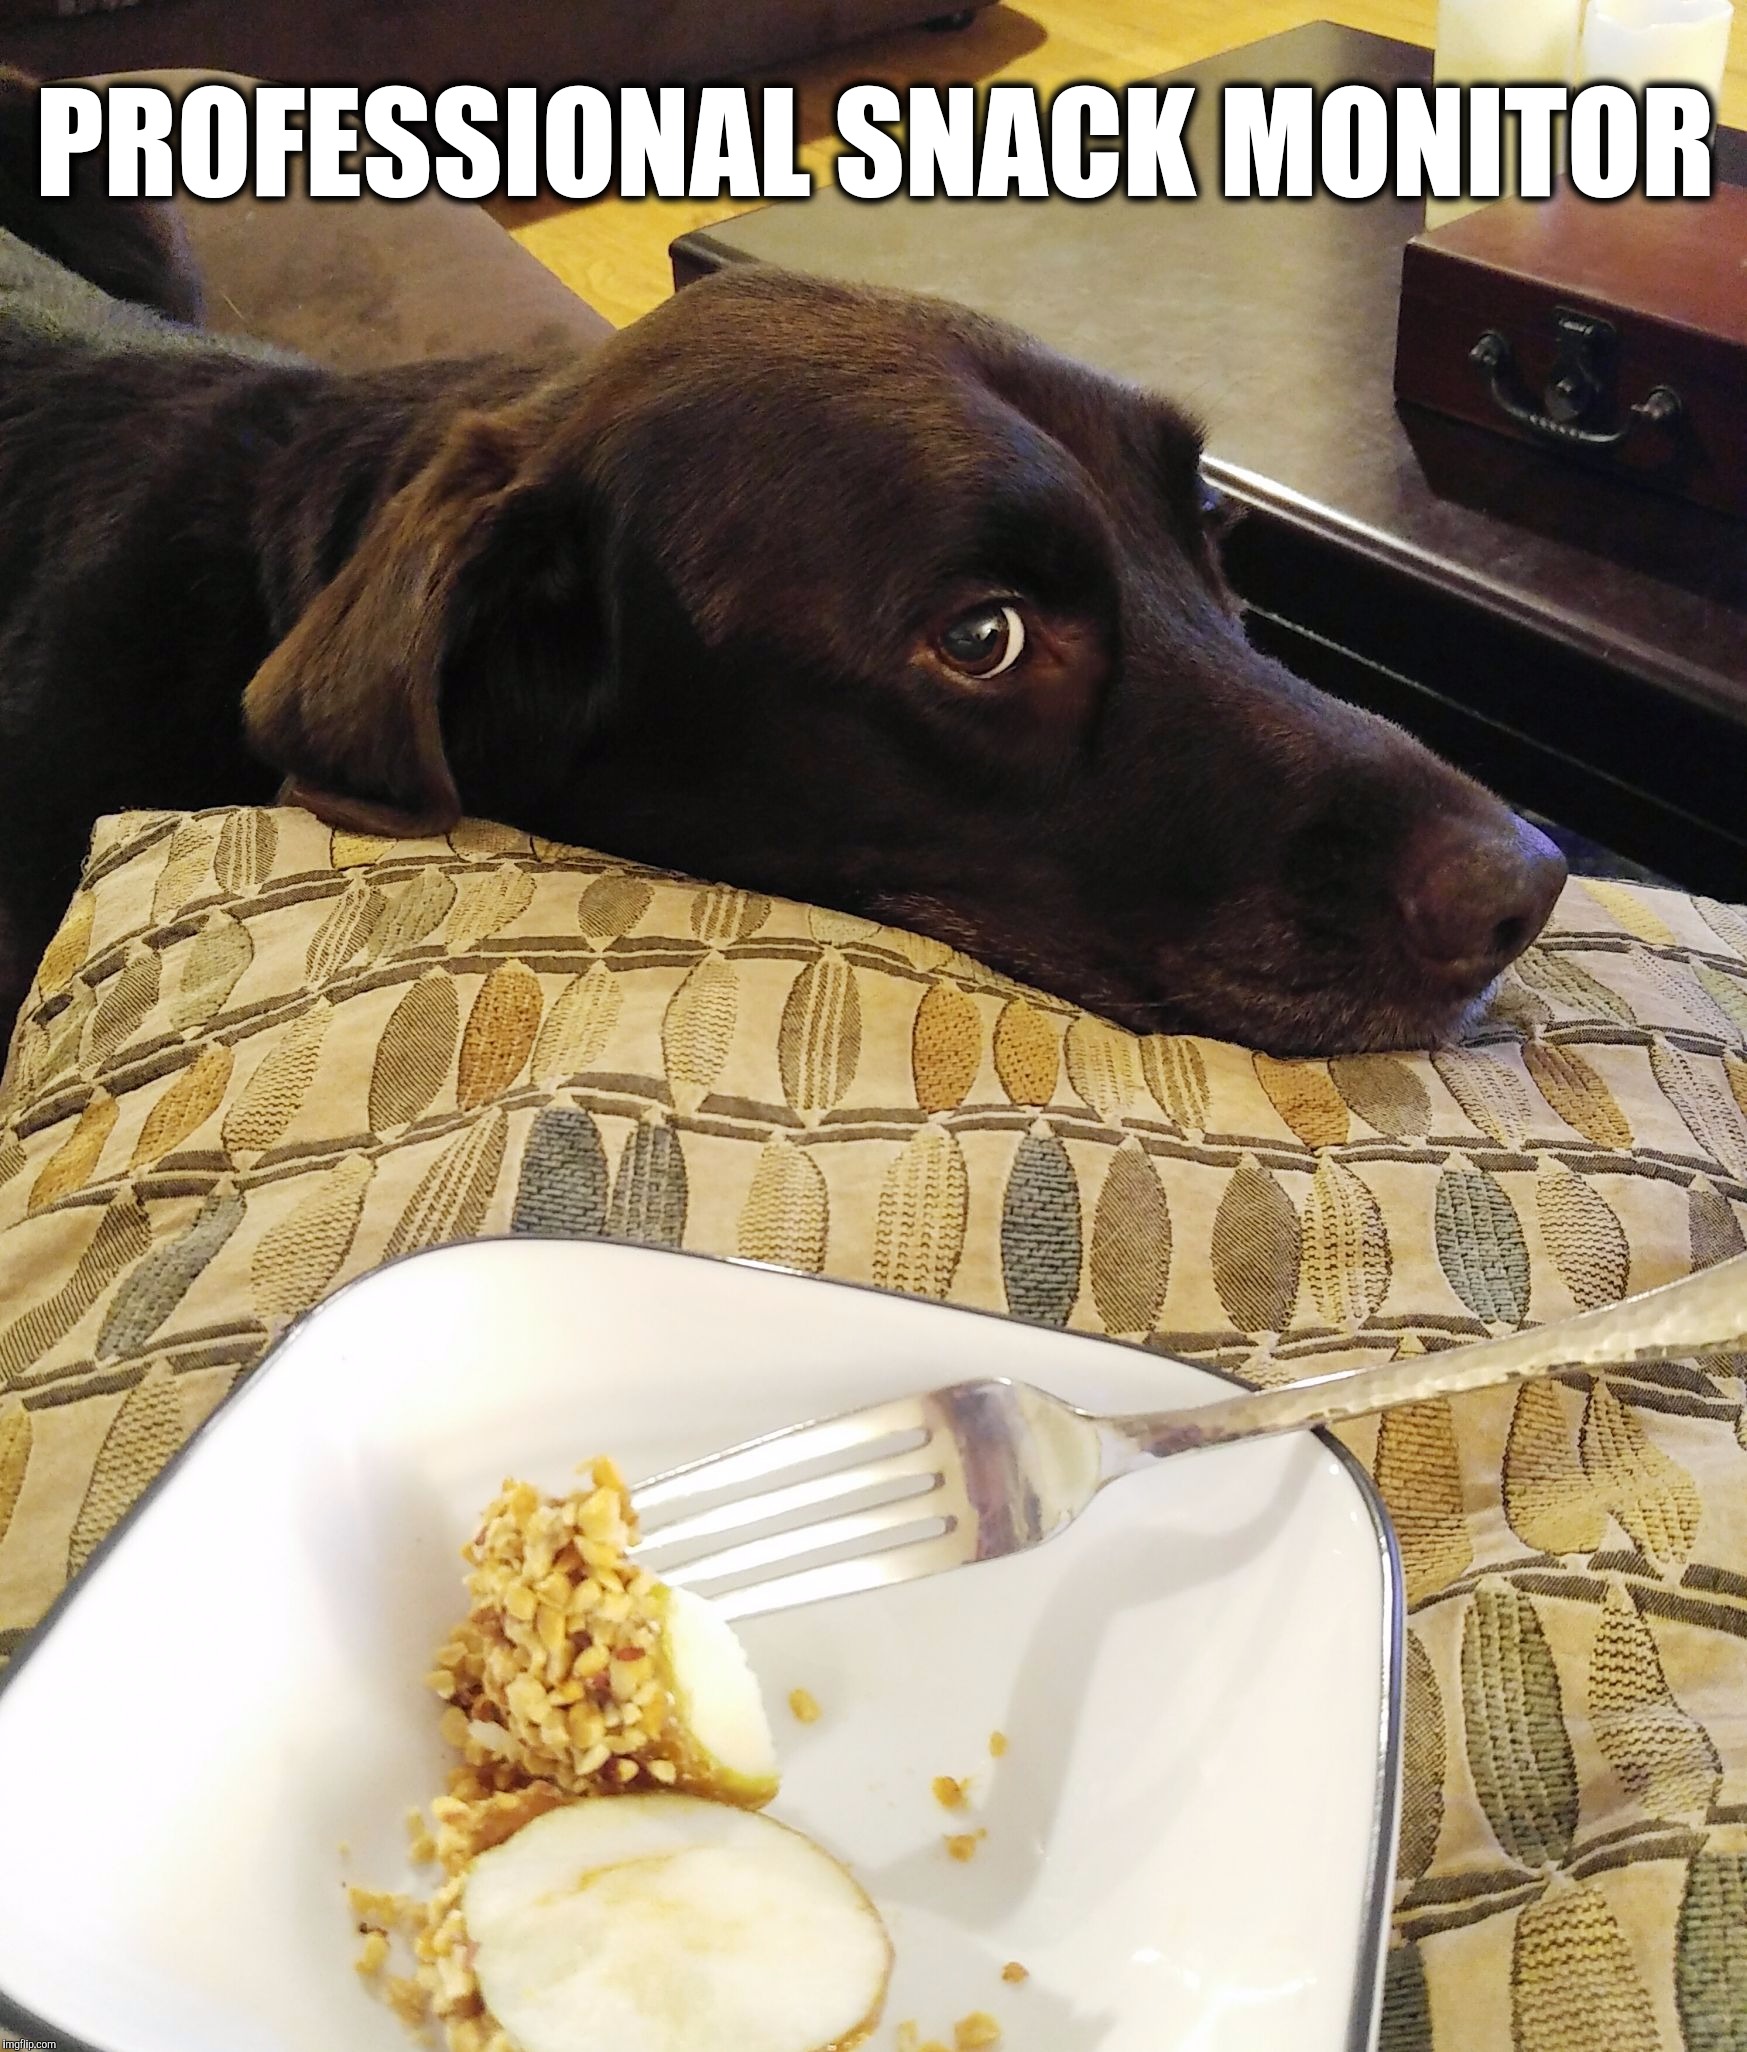 Professional snack monitor at your service  | PROFESSIONAL SNACK MONITOR | image tagged in chuckie the chocolate lab,snacks,funny,funny dogs,professional snack monitor,labrador | made w/ Imgflip meme maker